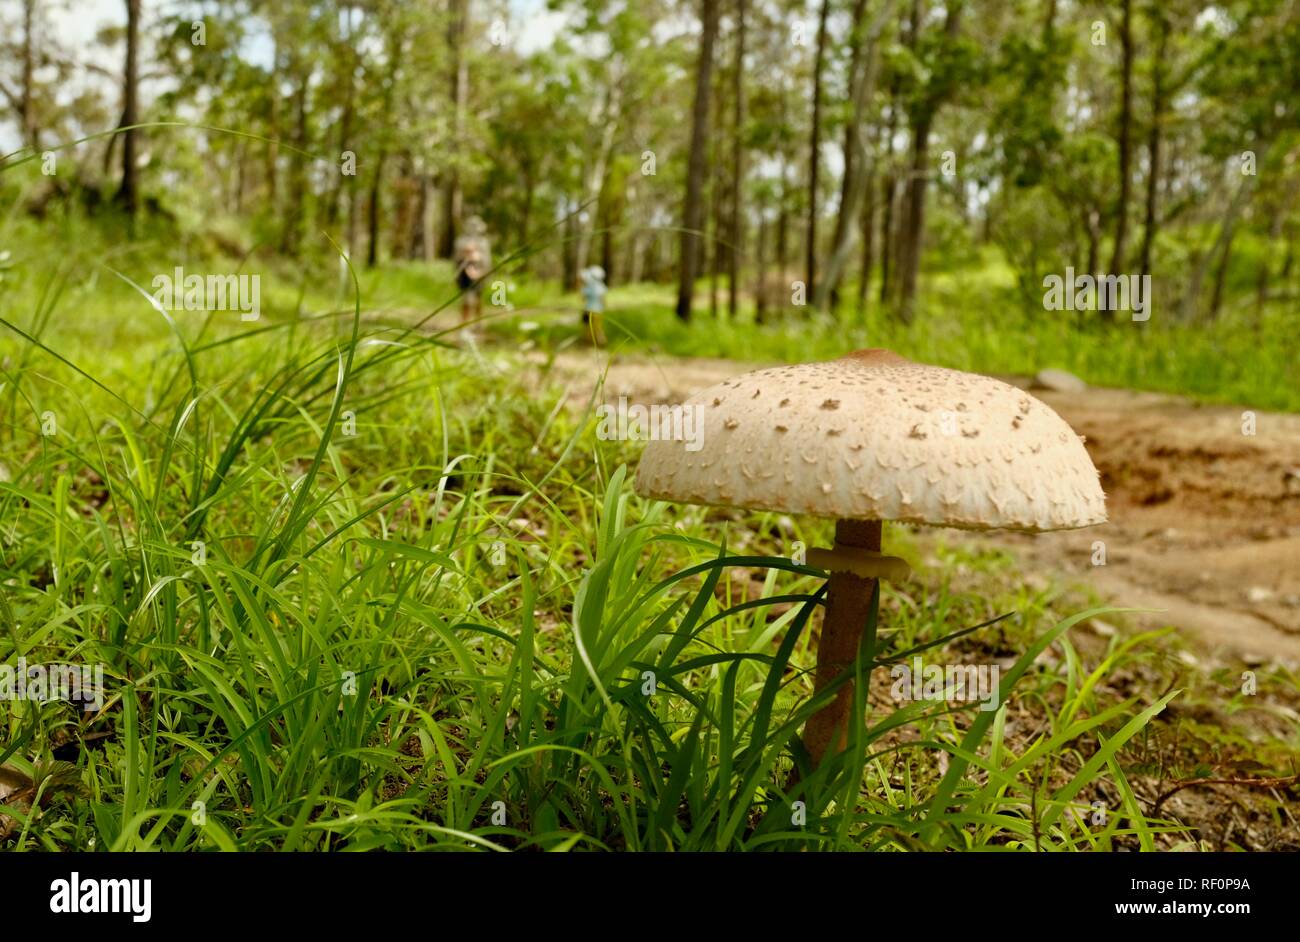 A toadstool with people in the background in a forest, Mia Mia State Forest, Queensland, Australia Stock Photo